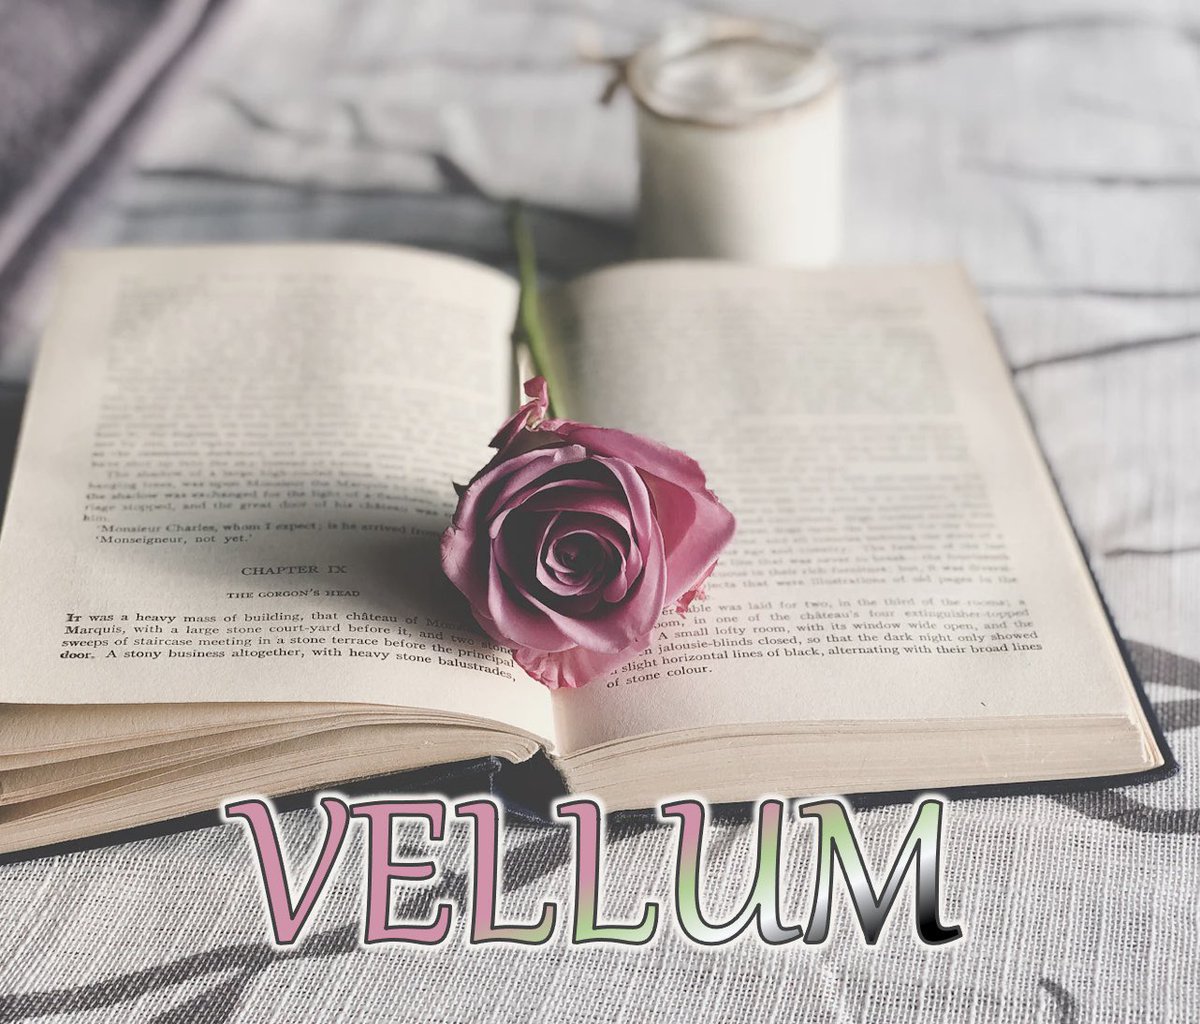 #SymphAndJules word of the day: Vellum

Don't forget to @ us in your posts, and we'll re-tweet! 💛📷

#WritingPrompts